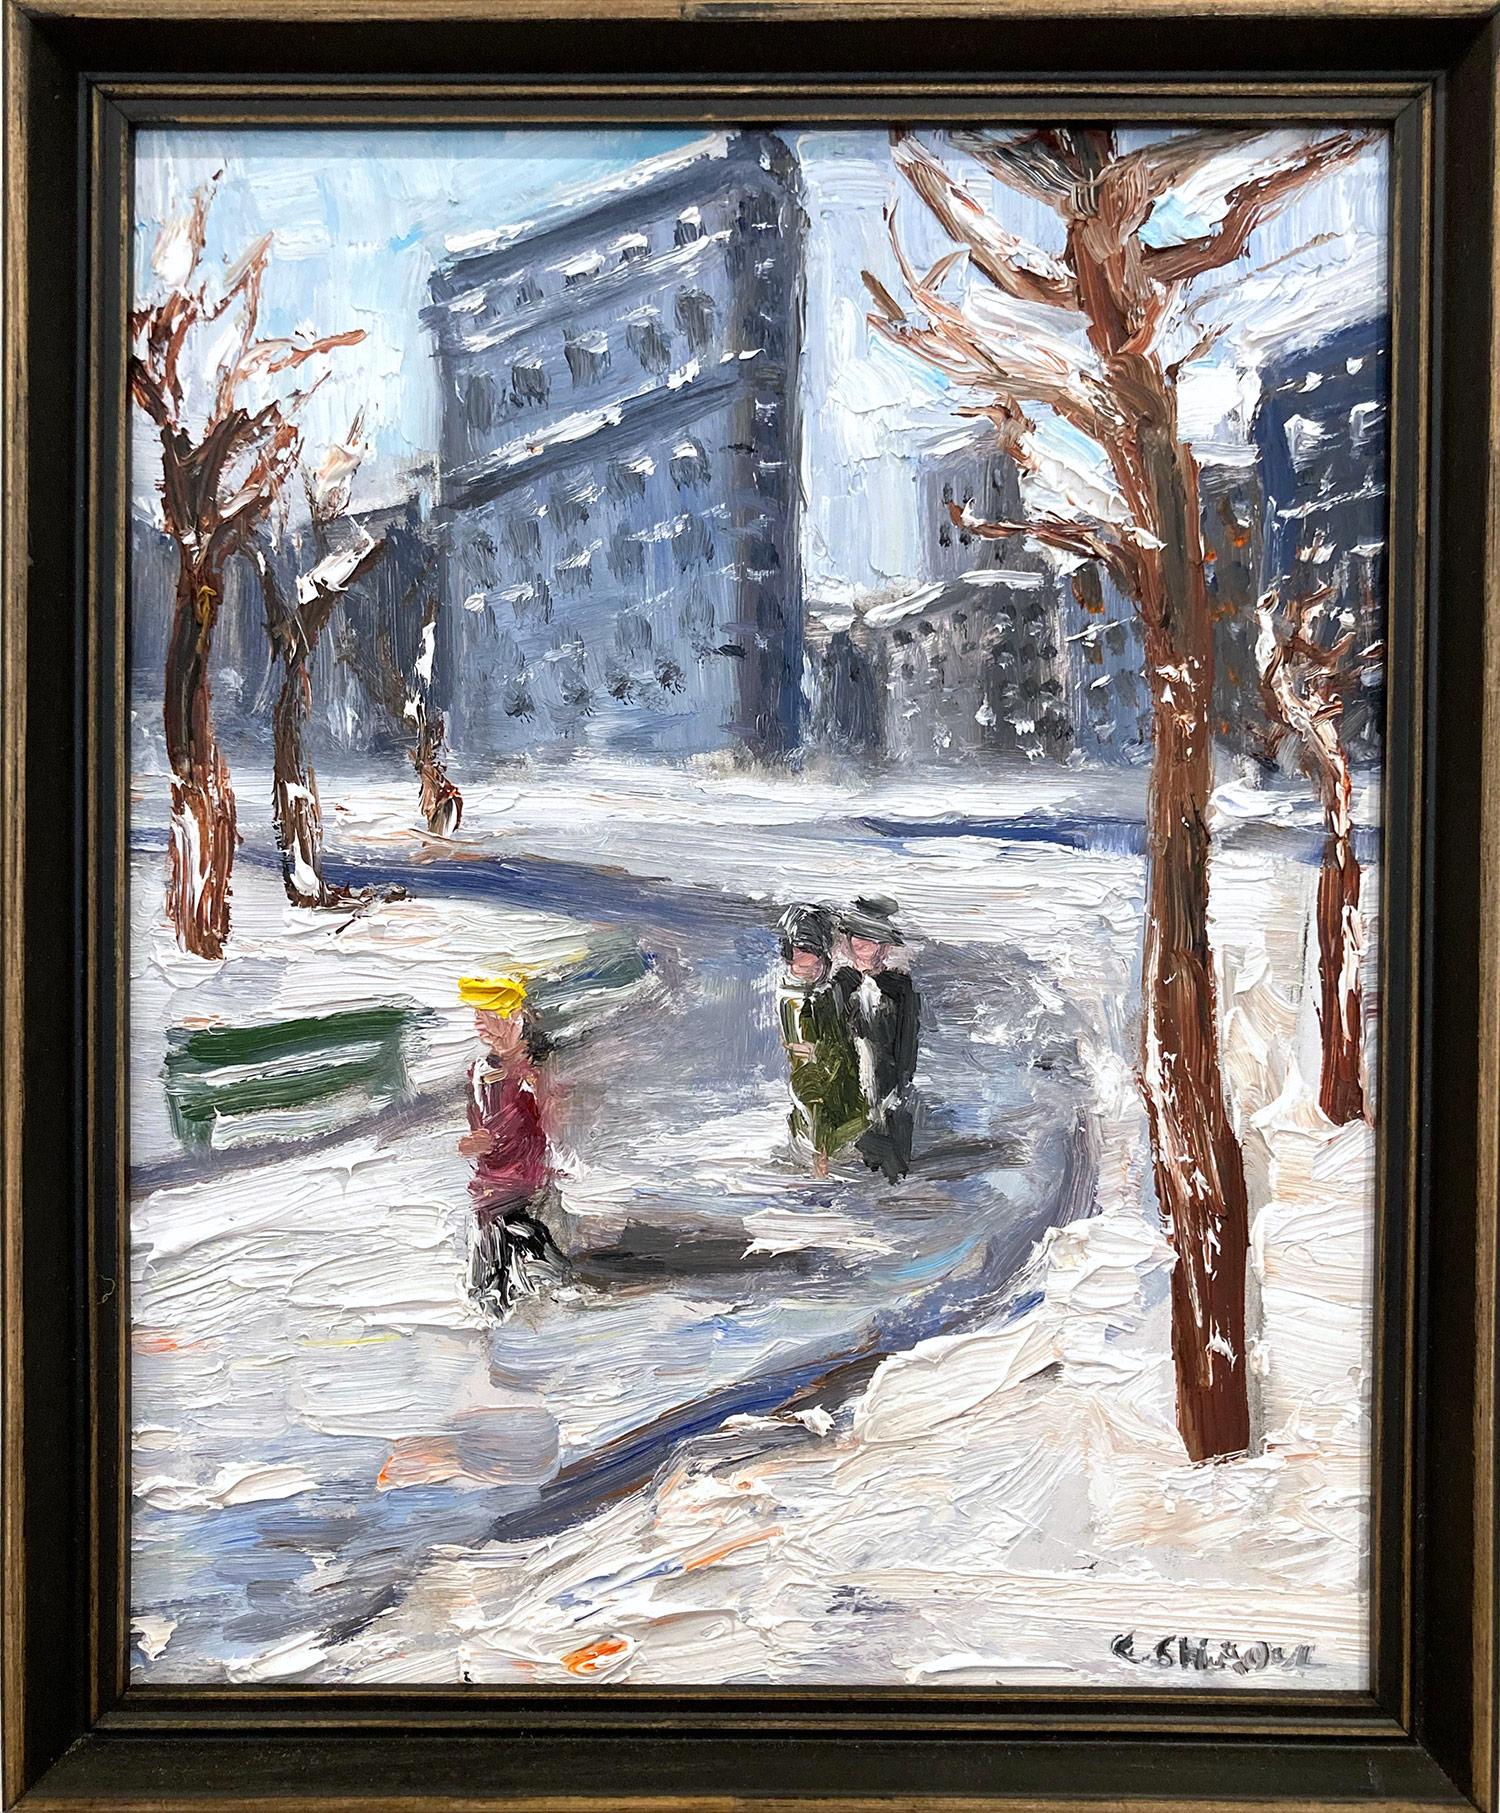 Cindy Shaoul Figurative Painting - "Snow in Flatiron" Impressionist Oil Painting Snow Scene Style of Guy Wiggins 